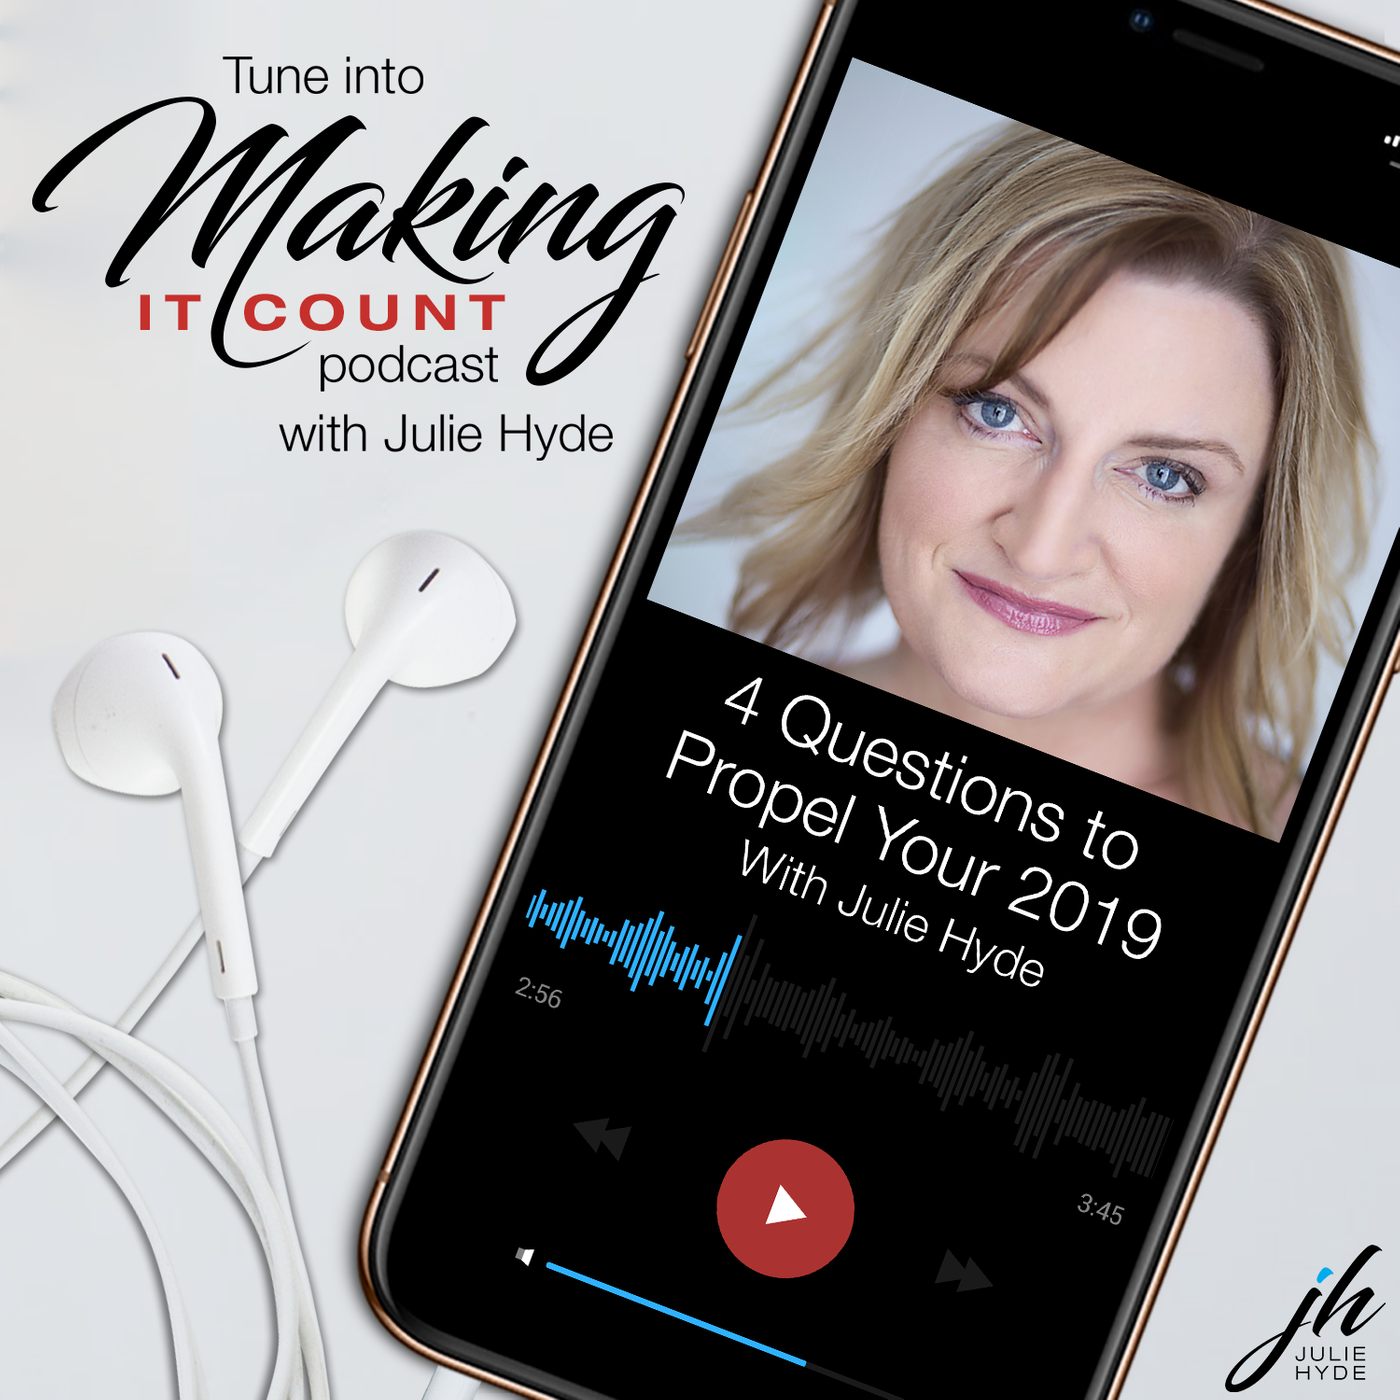 propel-your-2019-julie-hyde-making-it-count-busy-leadership-leader-leaders-keynote-mindset-speaker-mentor-business-empower-lead-empowering-podcast-great-intentional-authentic-mentor-coach-role-model-top-best-inspire-engage-practical-insightful-boost-performance-tips-how-to-strategy-powerful-change-mindset-thrive-results-corporate-future-smart-program-mentorship-career-next-level-step-reconnect-control-proactive-agile-adaptable-one-on-one-woman-lady-boss-female-sydney-australia-speaker-host-guide-guidance-business-ceo-management